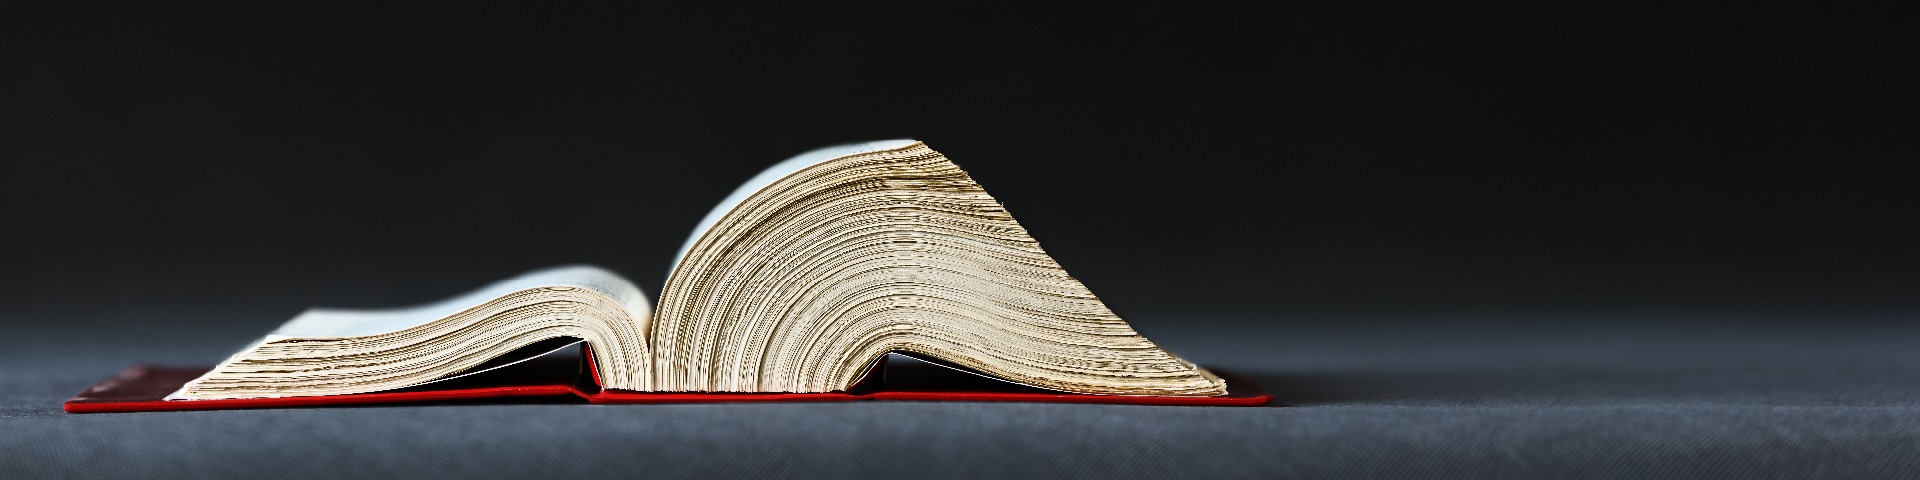 A large open book, with a red cover, on a grey background.